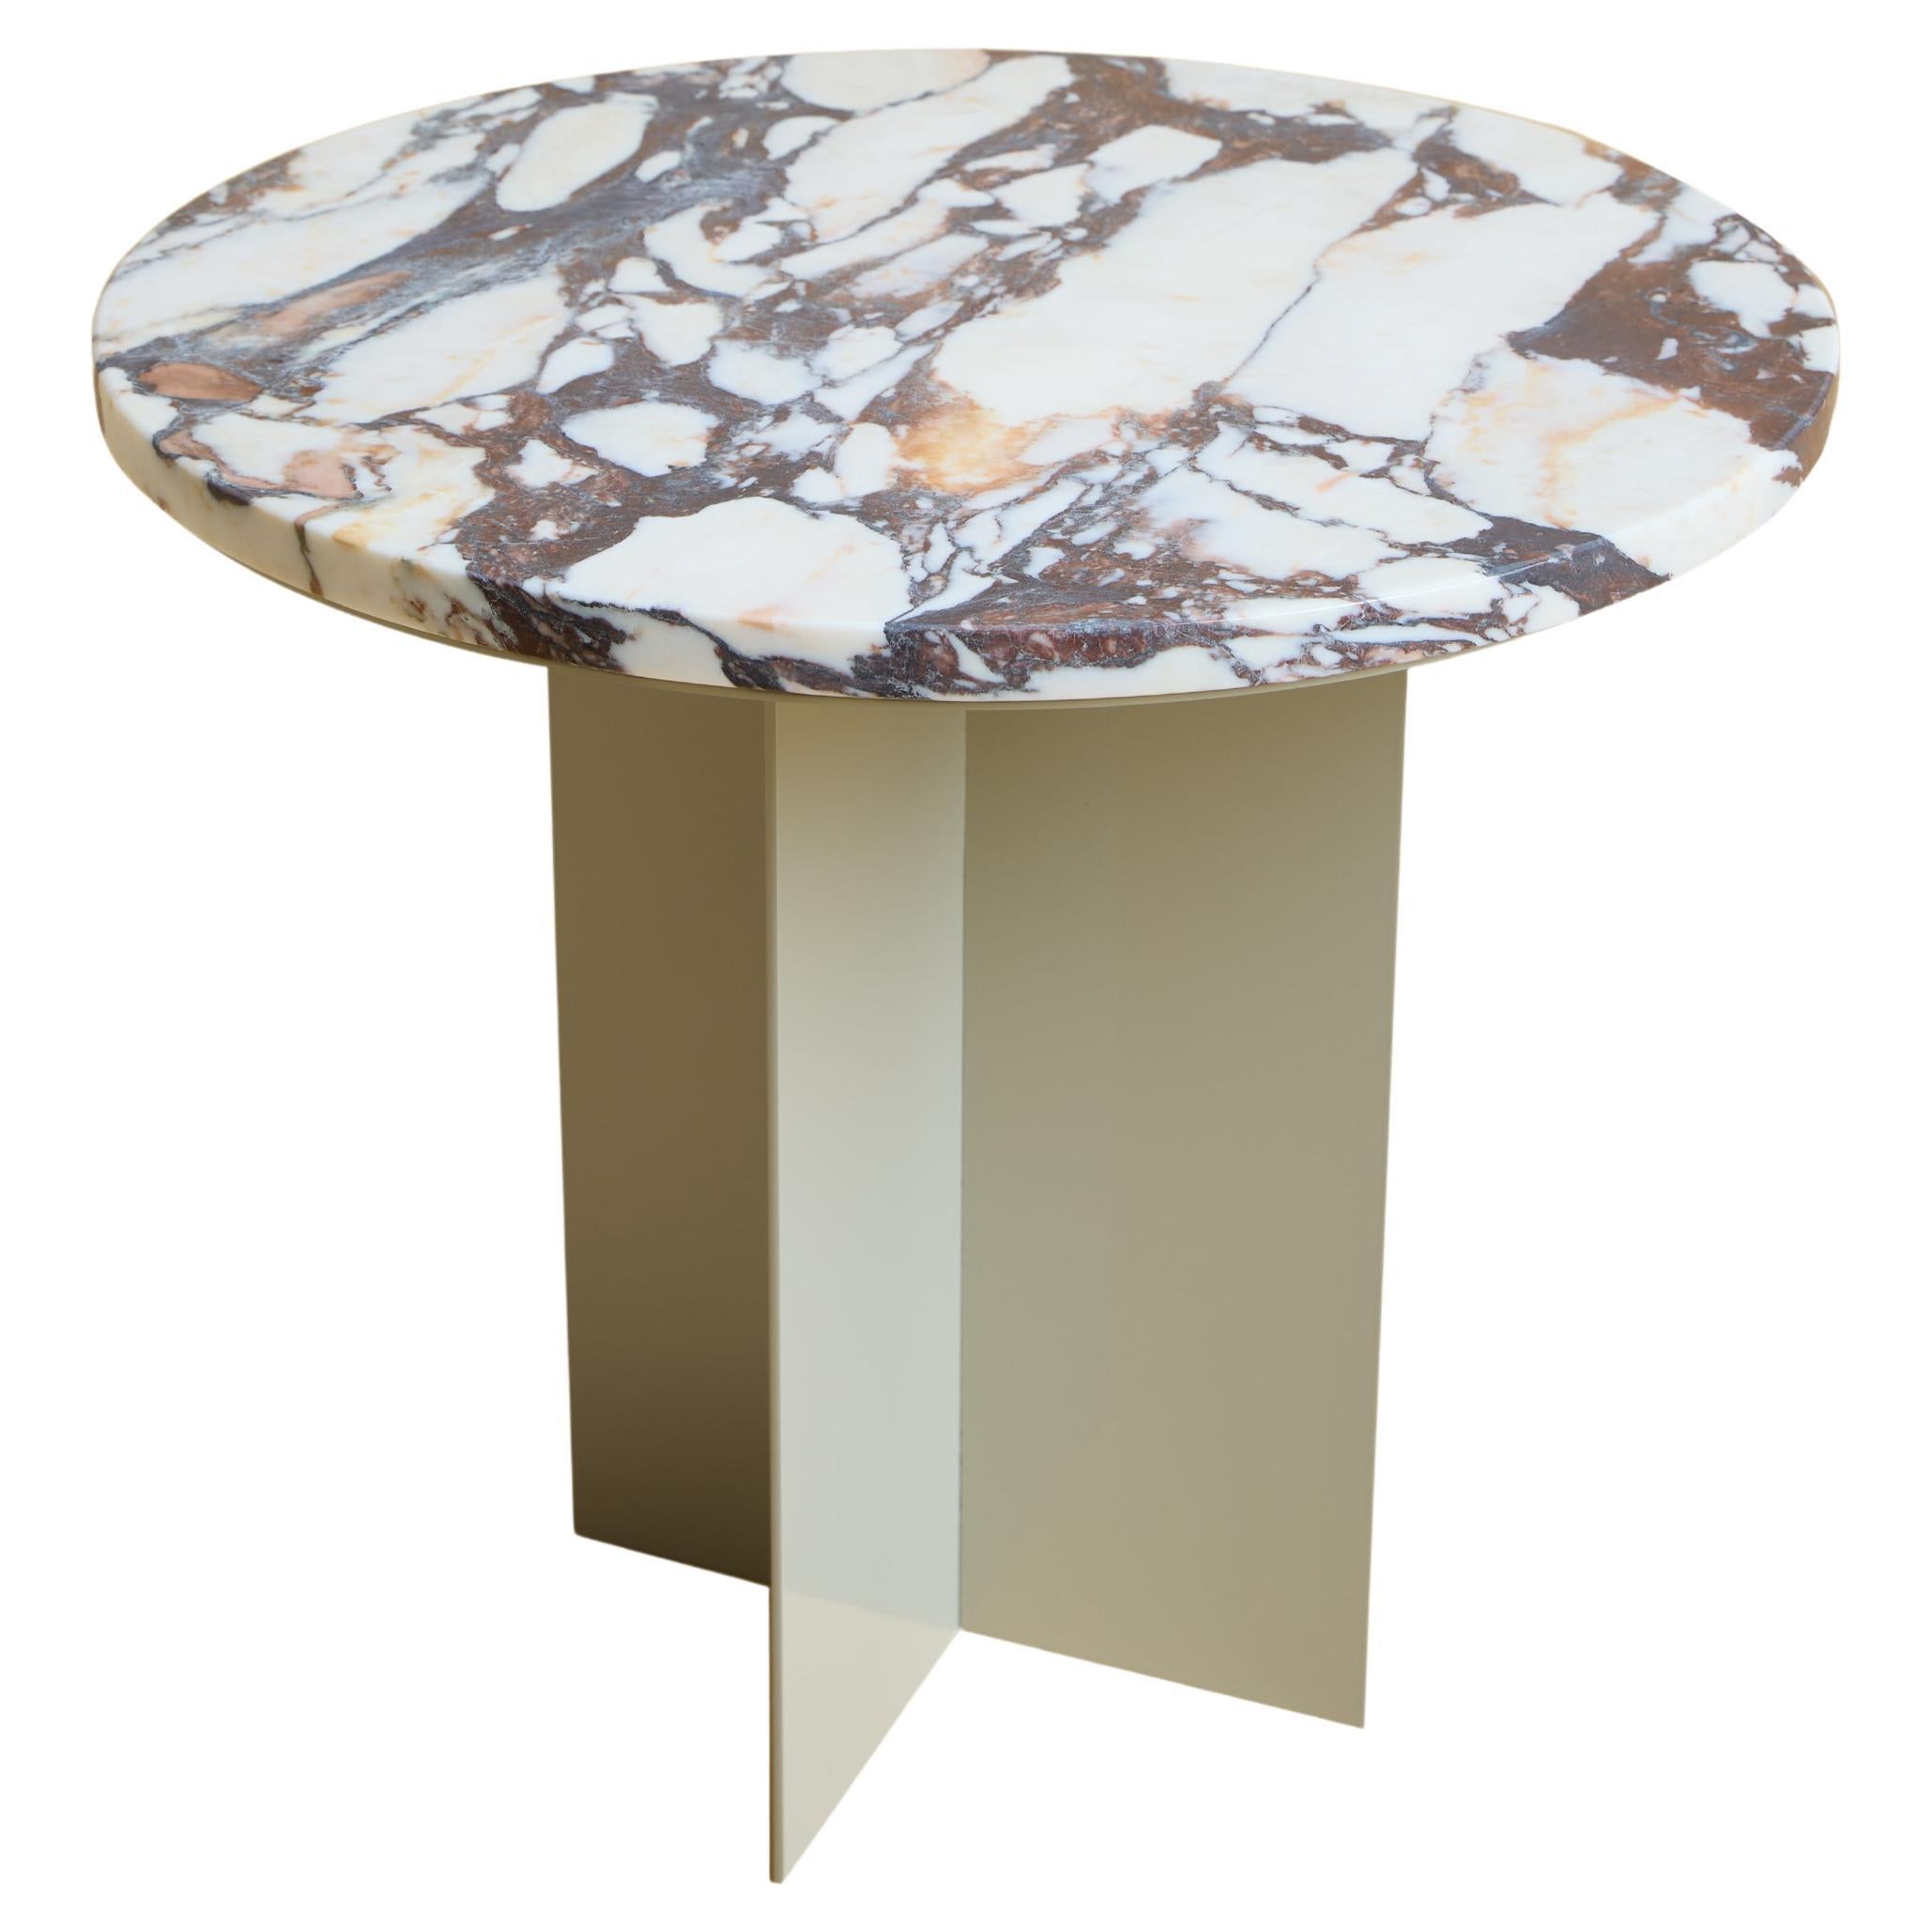 Calacatta Marble and Metal Coffee Table, Made in Italy